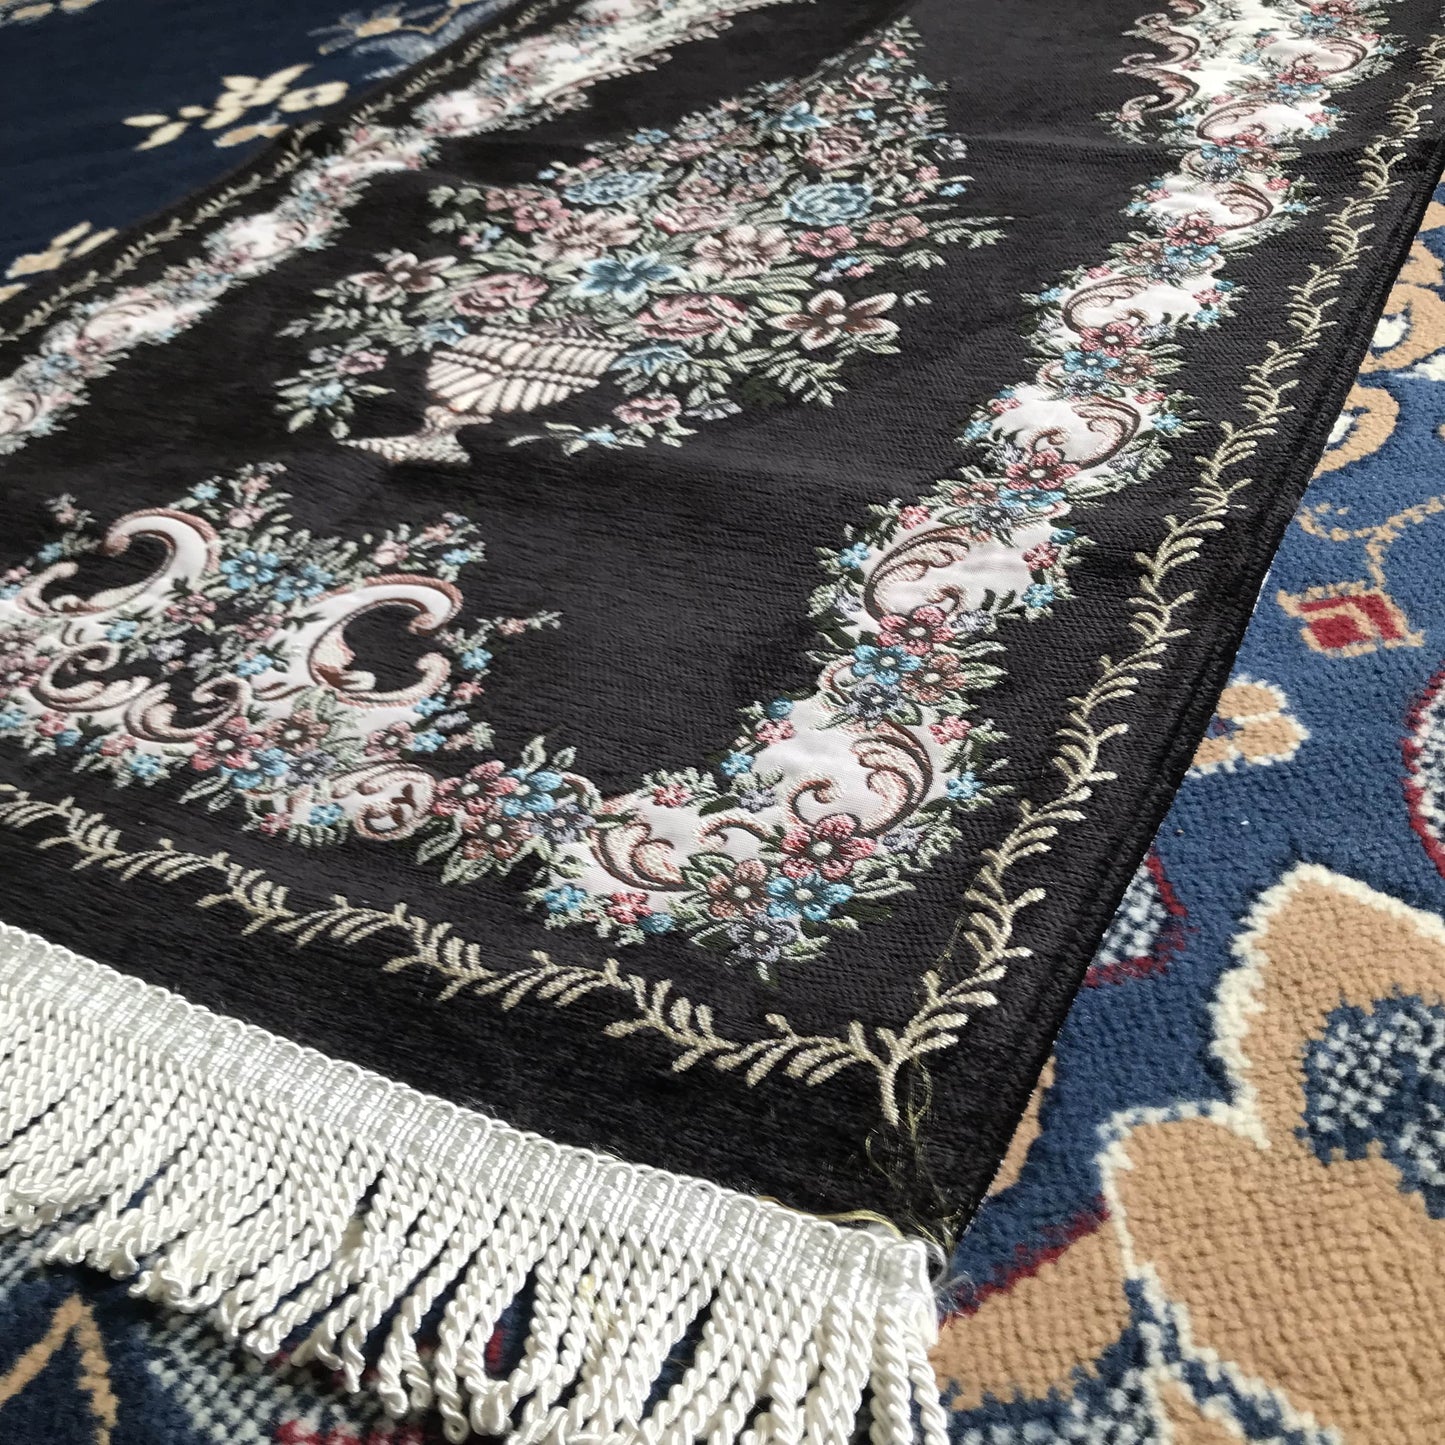 Embroidered Floral Lined Thick Prayer Rug with Gift Box